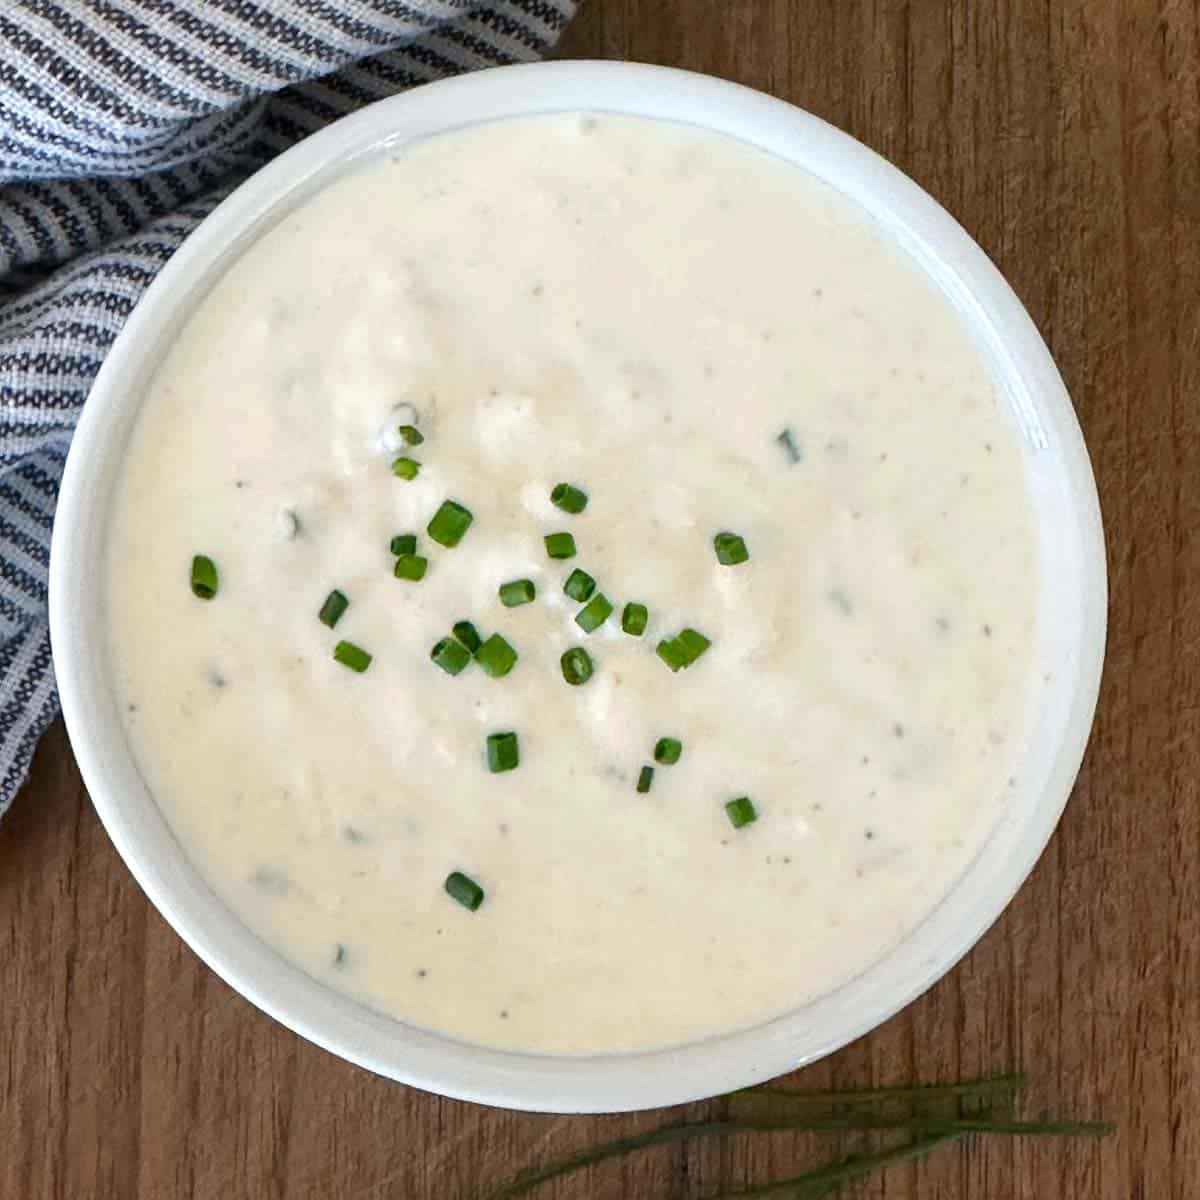 homemade horseradish cream sauce pictured with a striped napkin and fresh chives